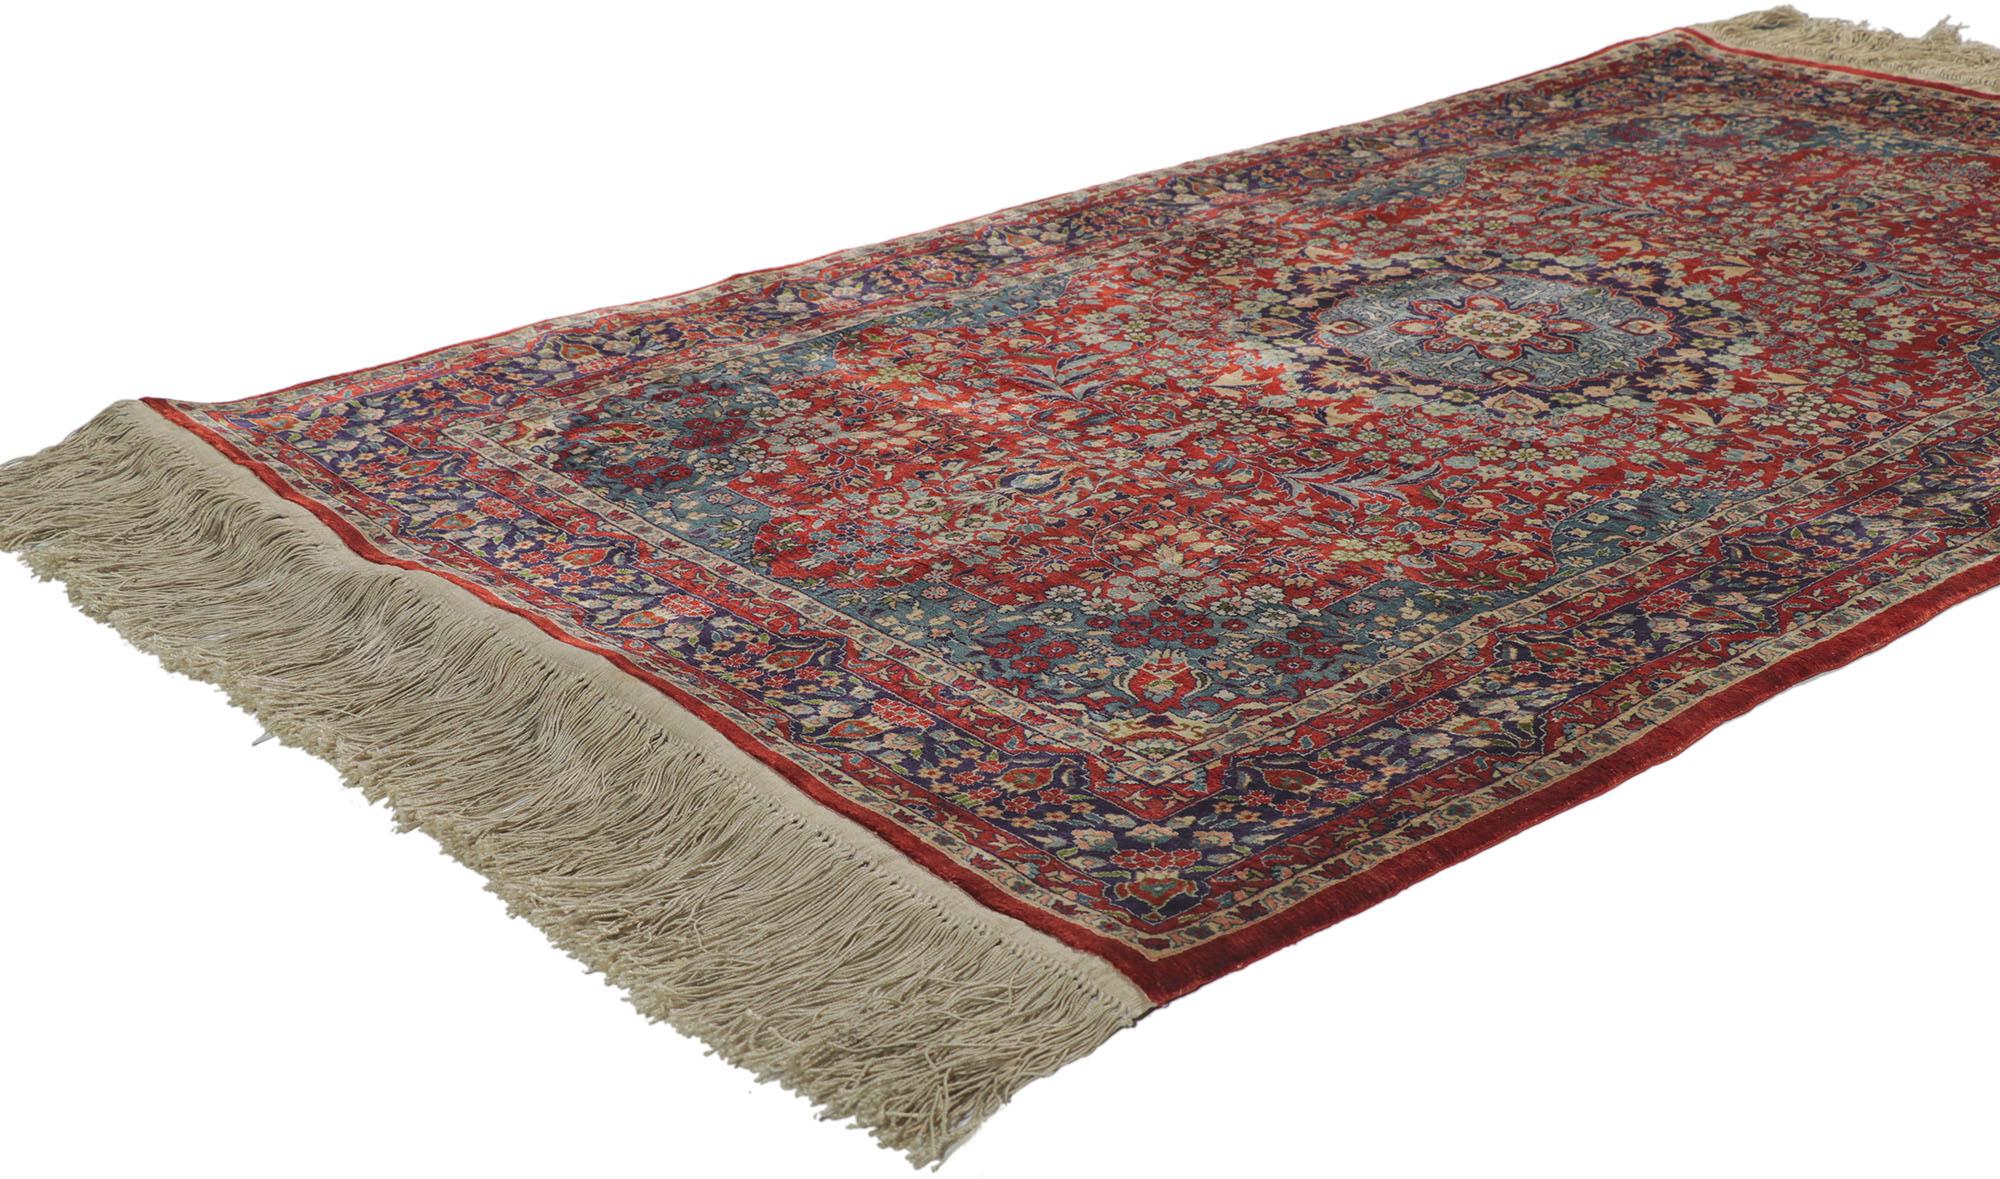 78219 Vintage Silk Qum Style Rug, 03'00 x 05'01.
 Rendered in variegated shades of red, blue, beige, navy blue, sky blue,  pistachio, peach, and tan with other accent colors. Desirable Age Wear. Abrash. Hand-knotted Silk. Made in China.